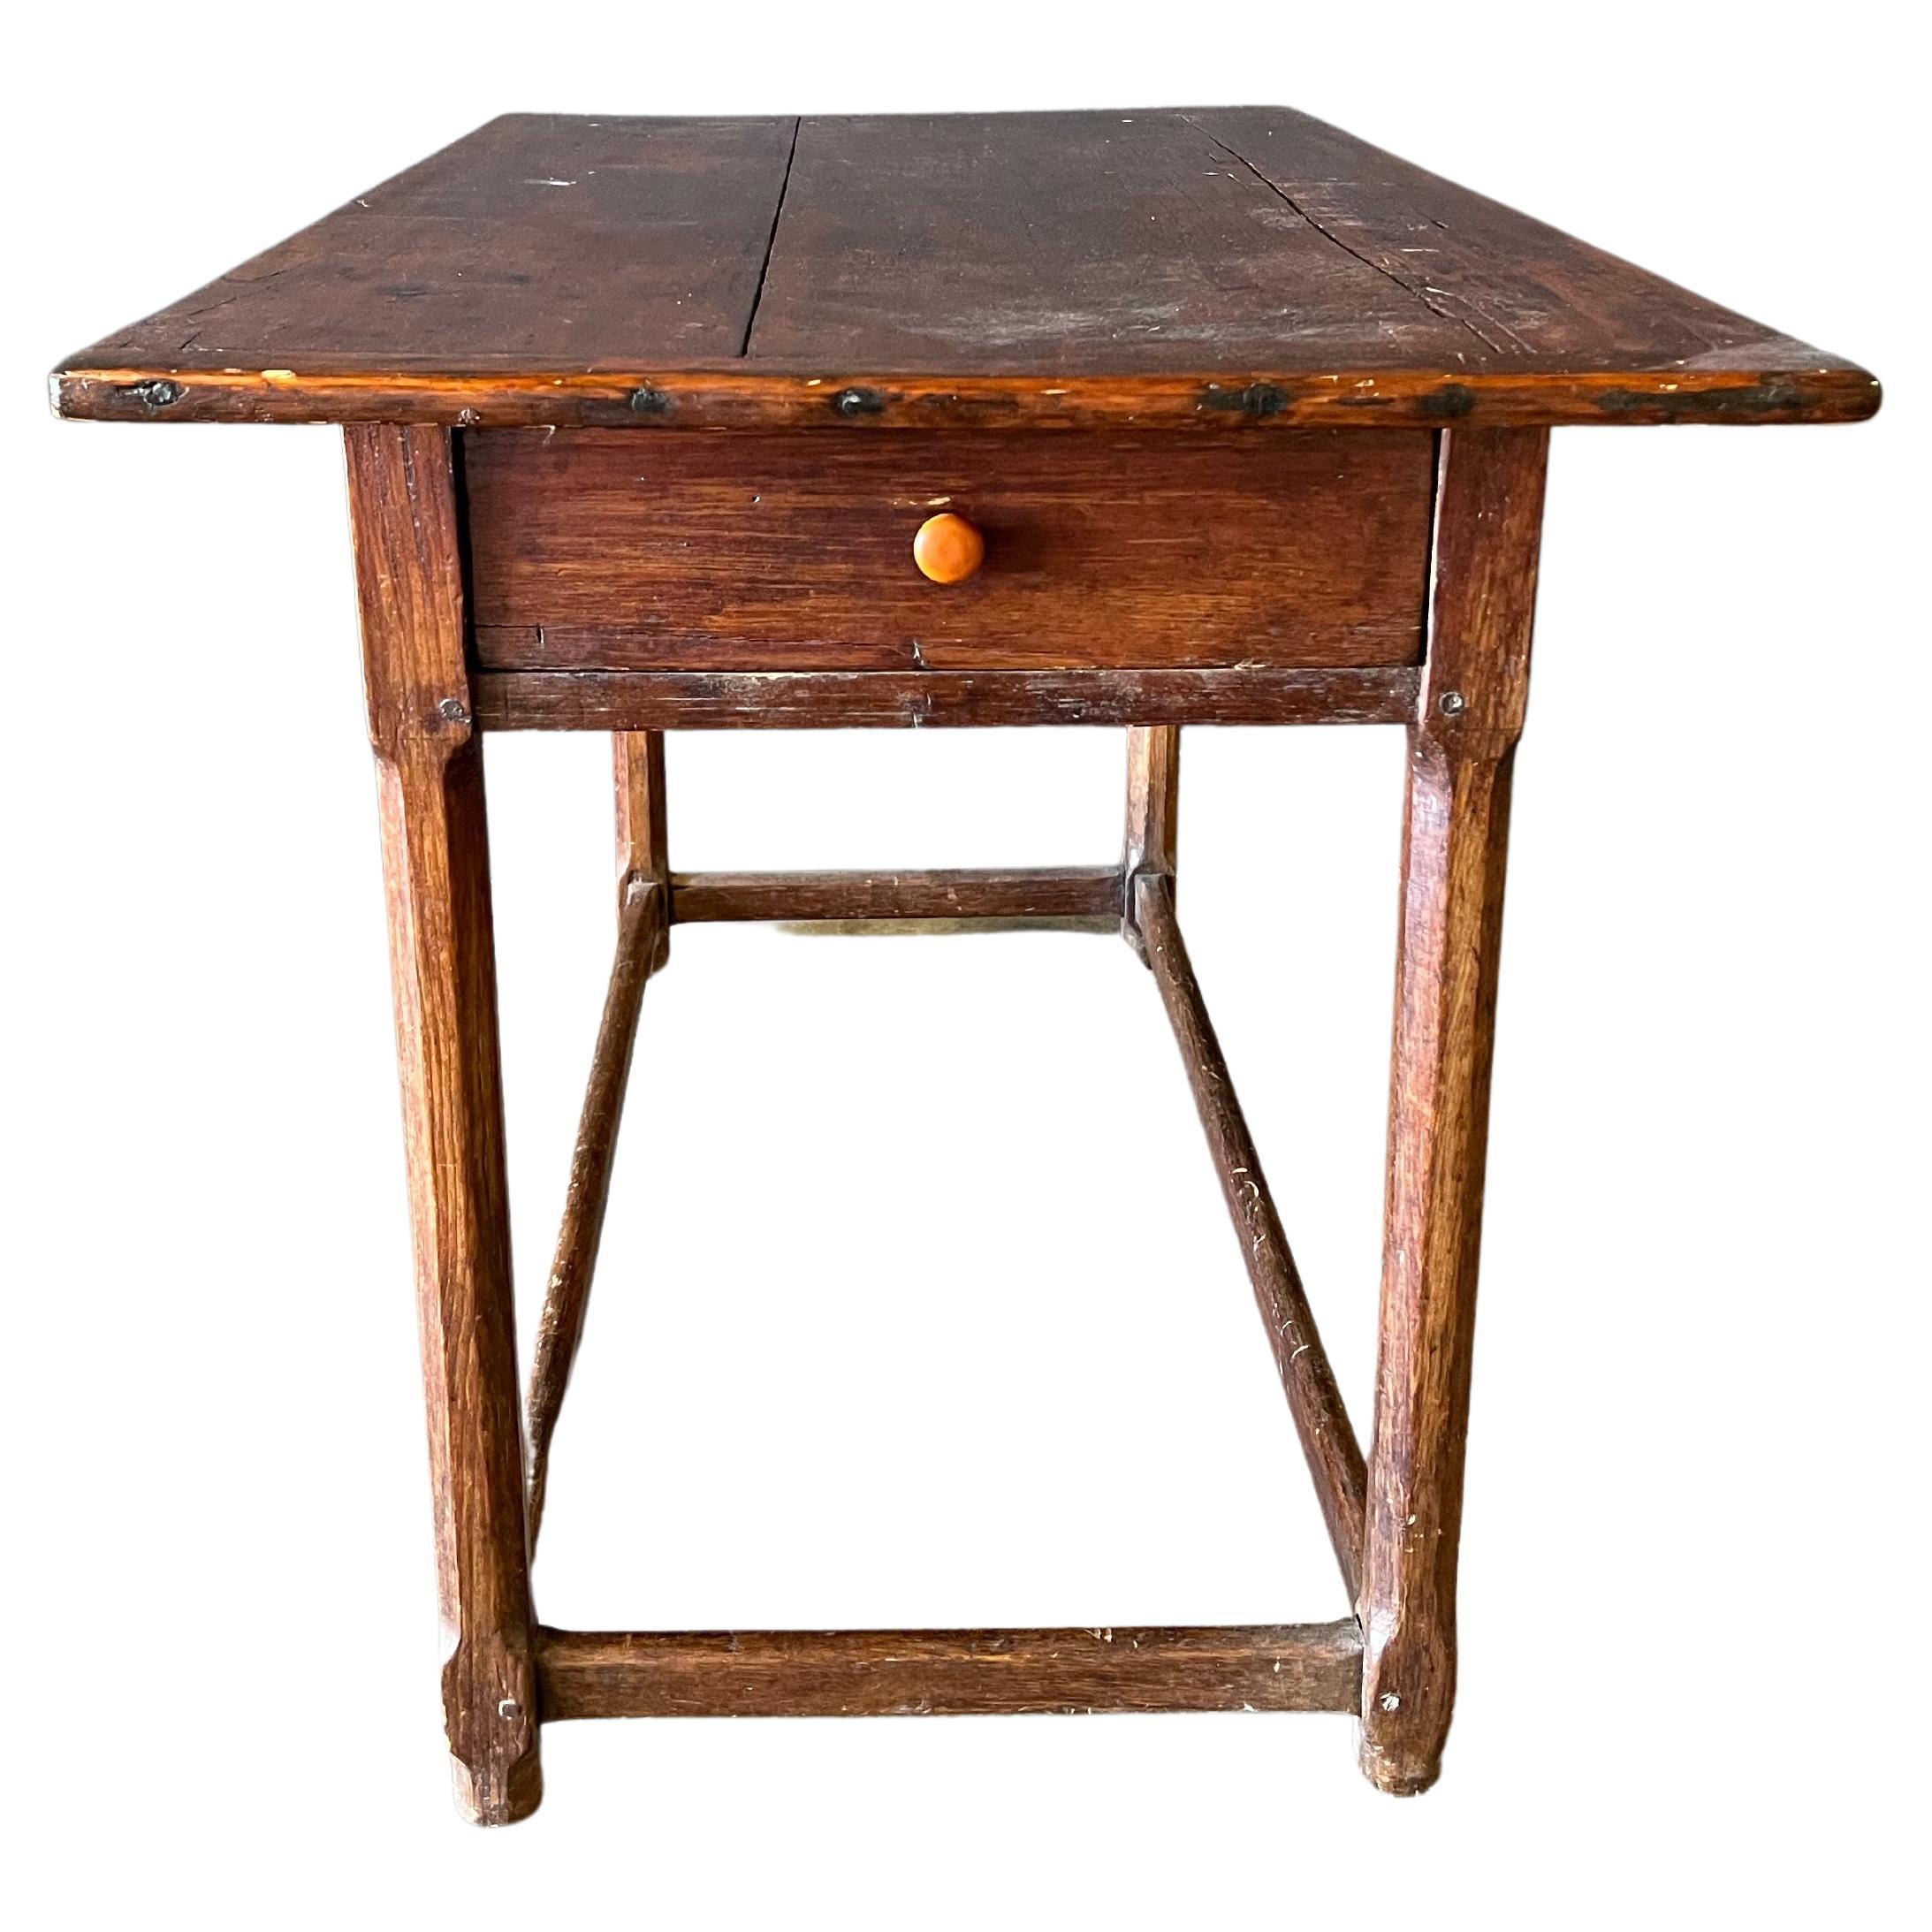 19th Century Hudson Vally Country Table or Desk with Drawers and Stretchers For Sale